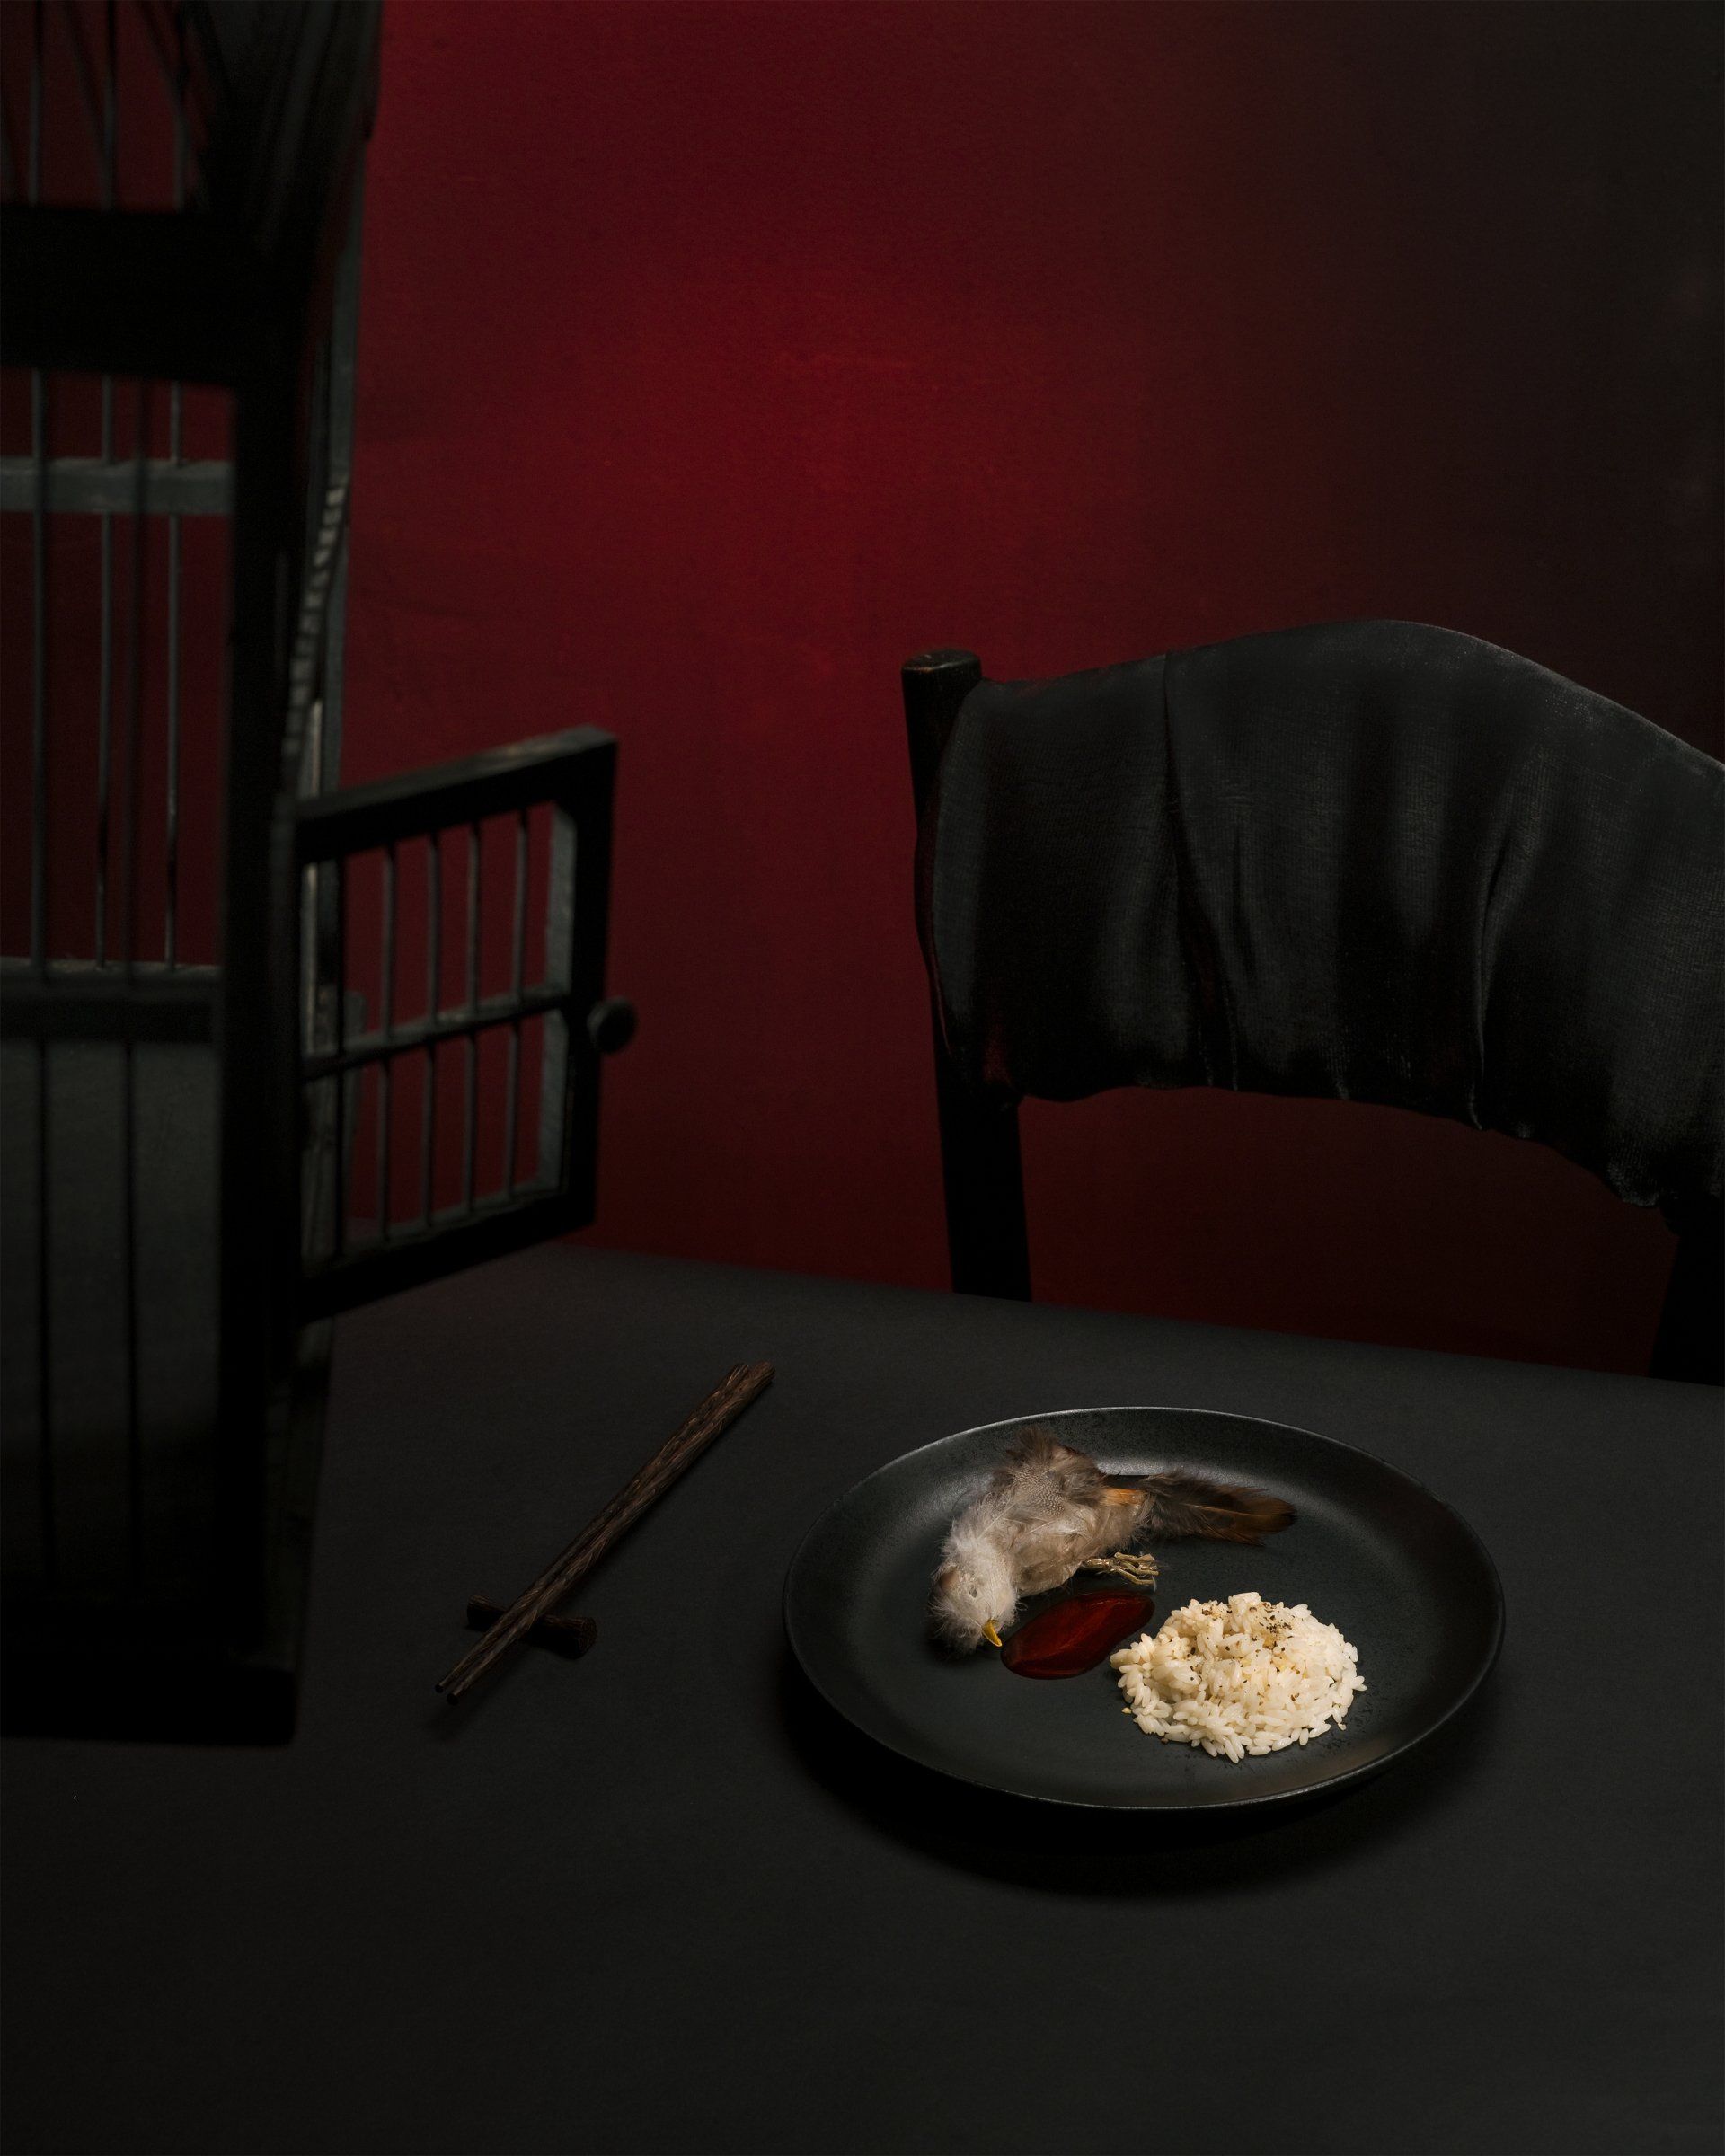 © Jacqueline Louter - Pet or dinner